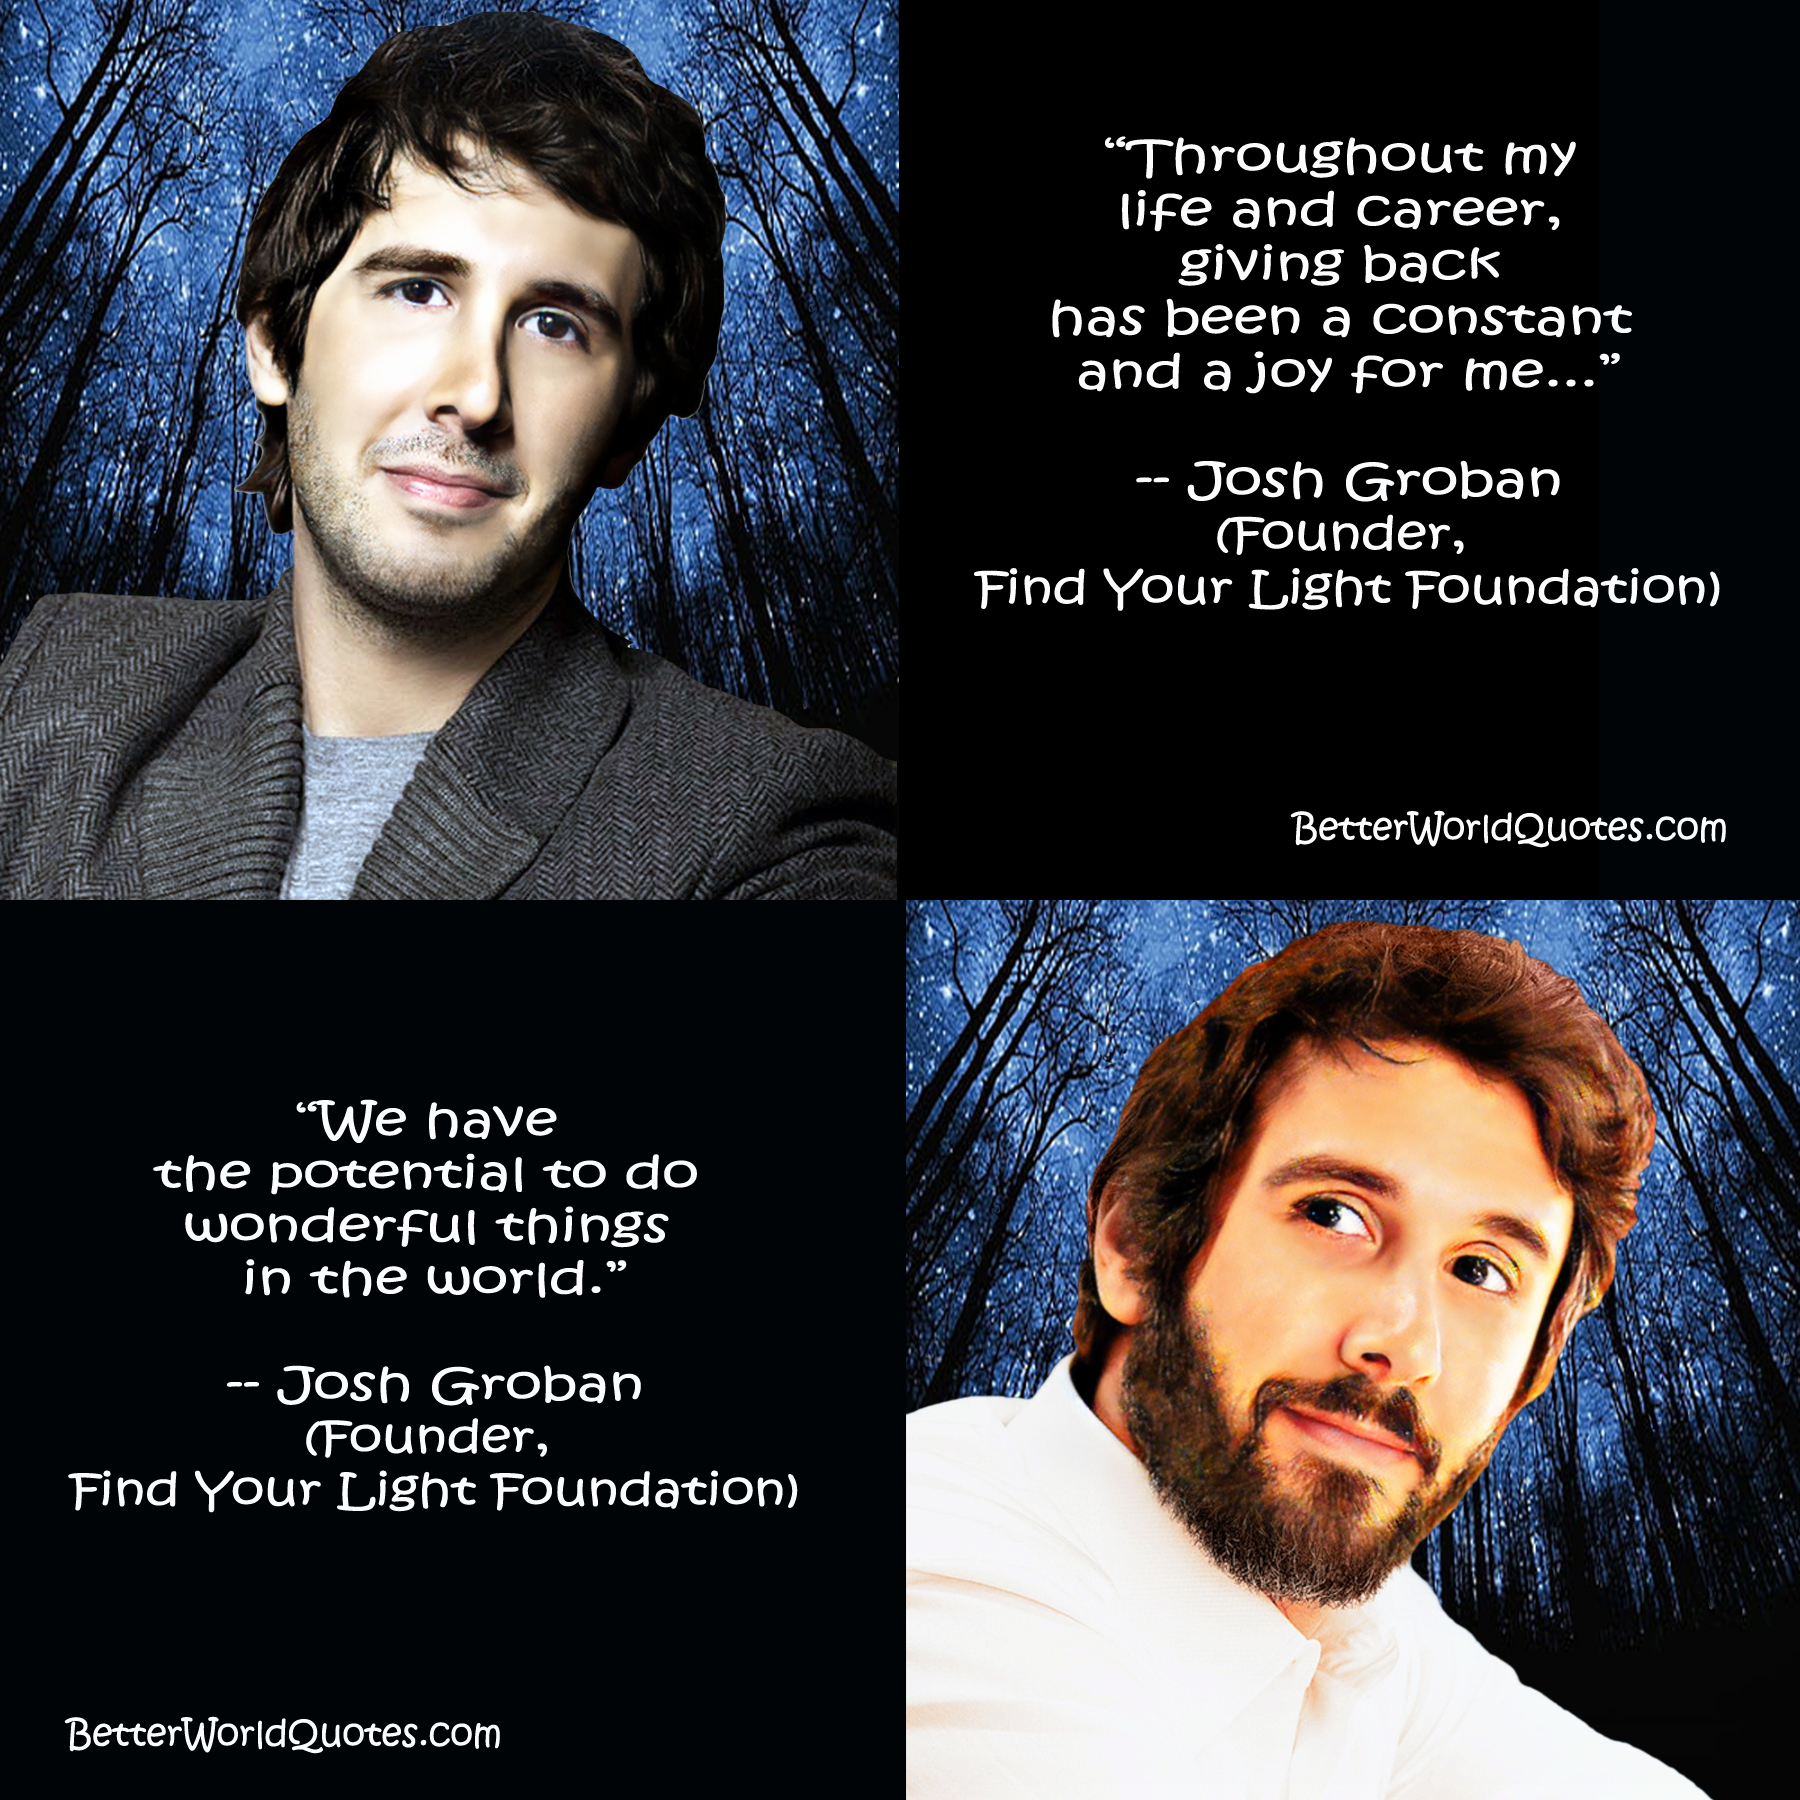 Josh Groban: Throughout my life and career, giving back has been a constant and a joy for me...
We have the potential to do wonderful things in the world.